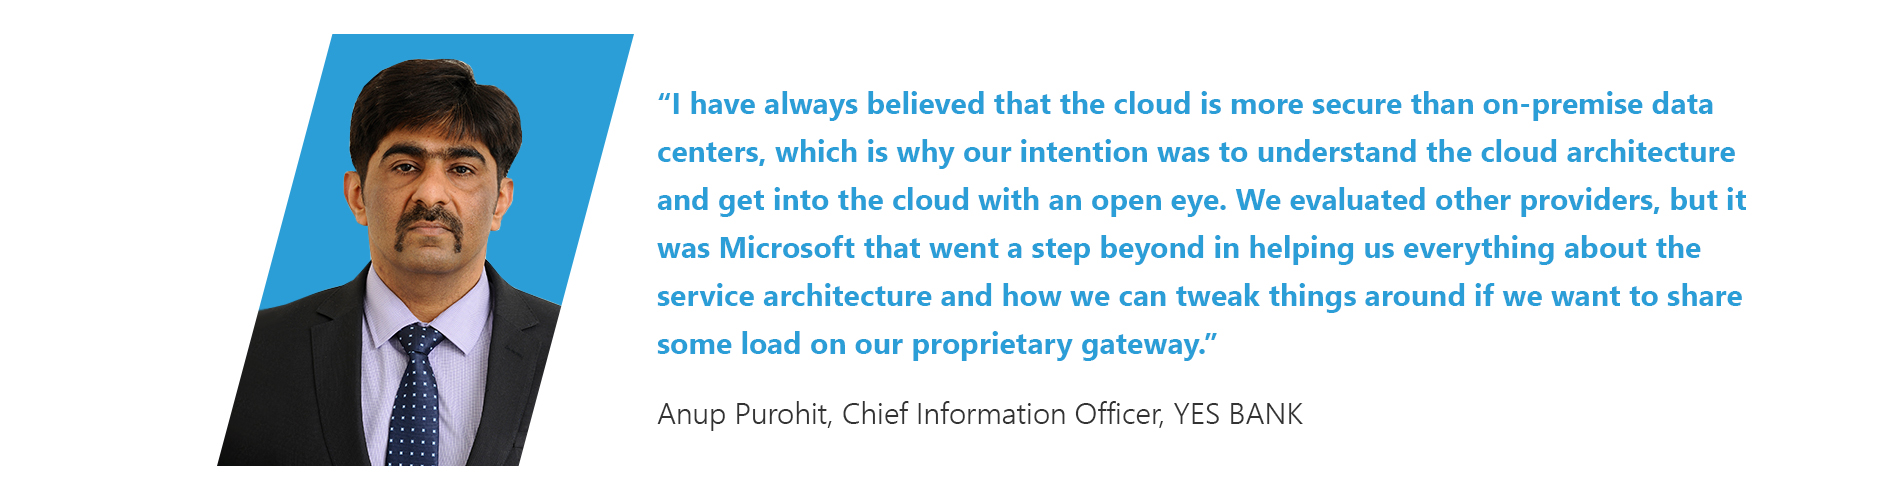 The image displays a quotation by Anup Purohit, with his photgraph inline. The quote reads: "I have always believed that the cloud is more secure than on-premise data centers, which is why our intention was to understand the cloud architecture and get into the cloud with an open eye. We evaluated other providers, but it was Microsoft that went a step beyond in helping us everything about the service architecture and how we can tweak things around if we want to share some load on our proprietary gateway."